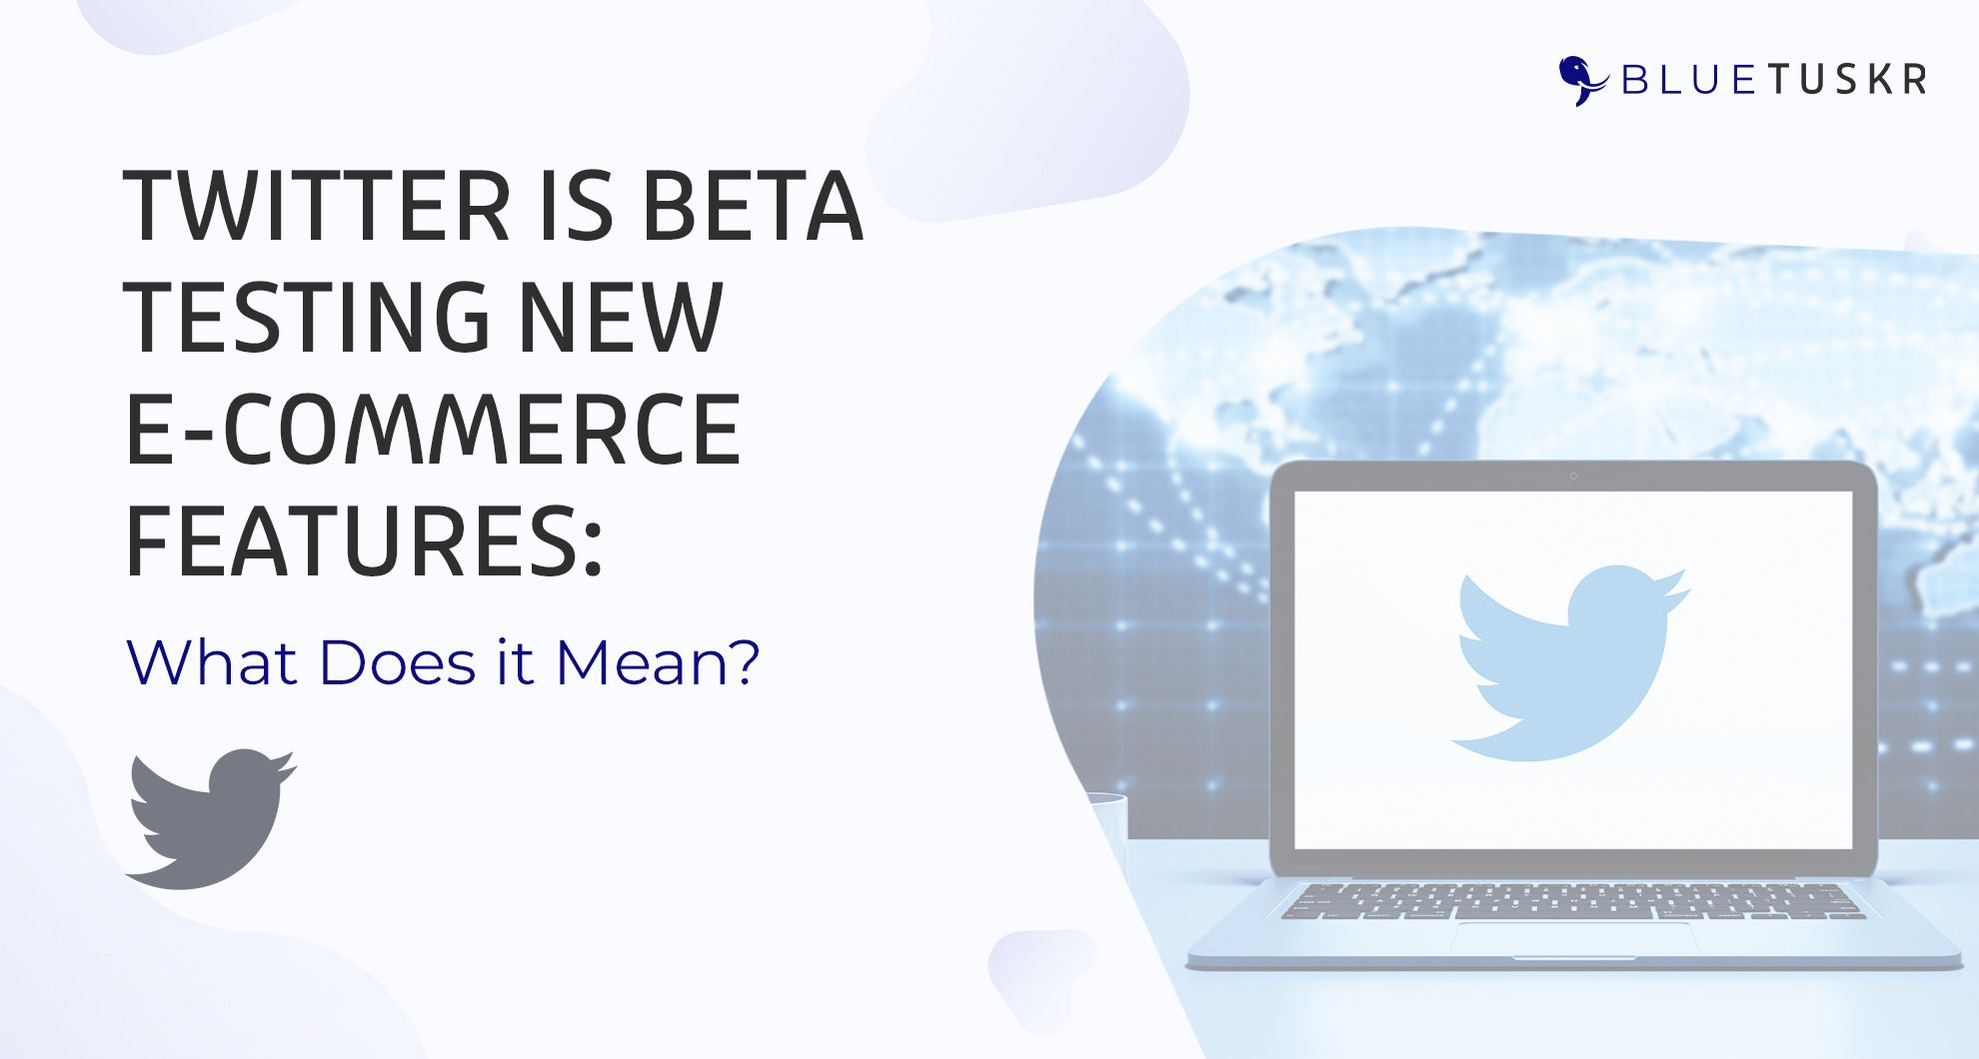 Twitter is Beta Testing New E-commerce Features: What Does it Mean?